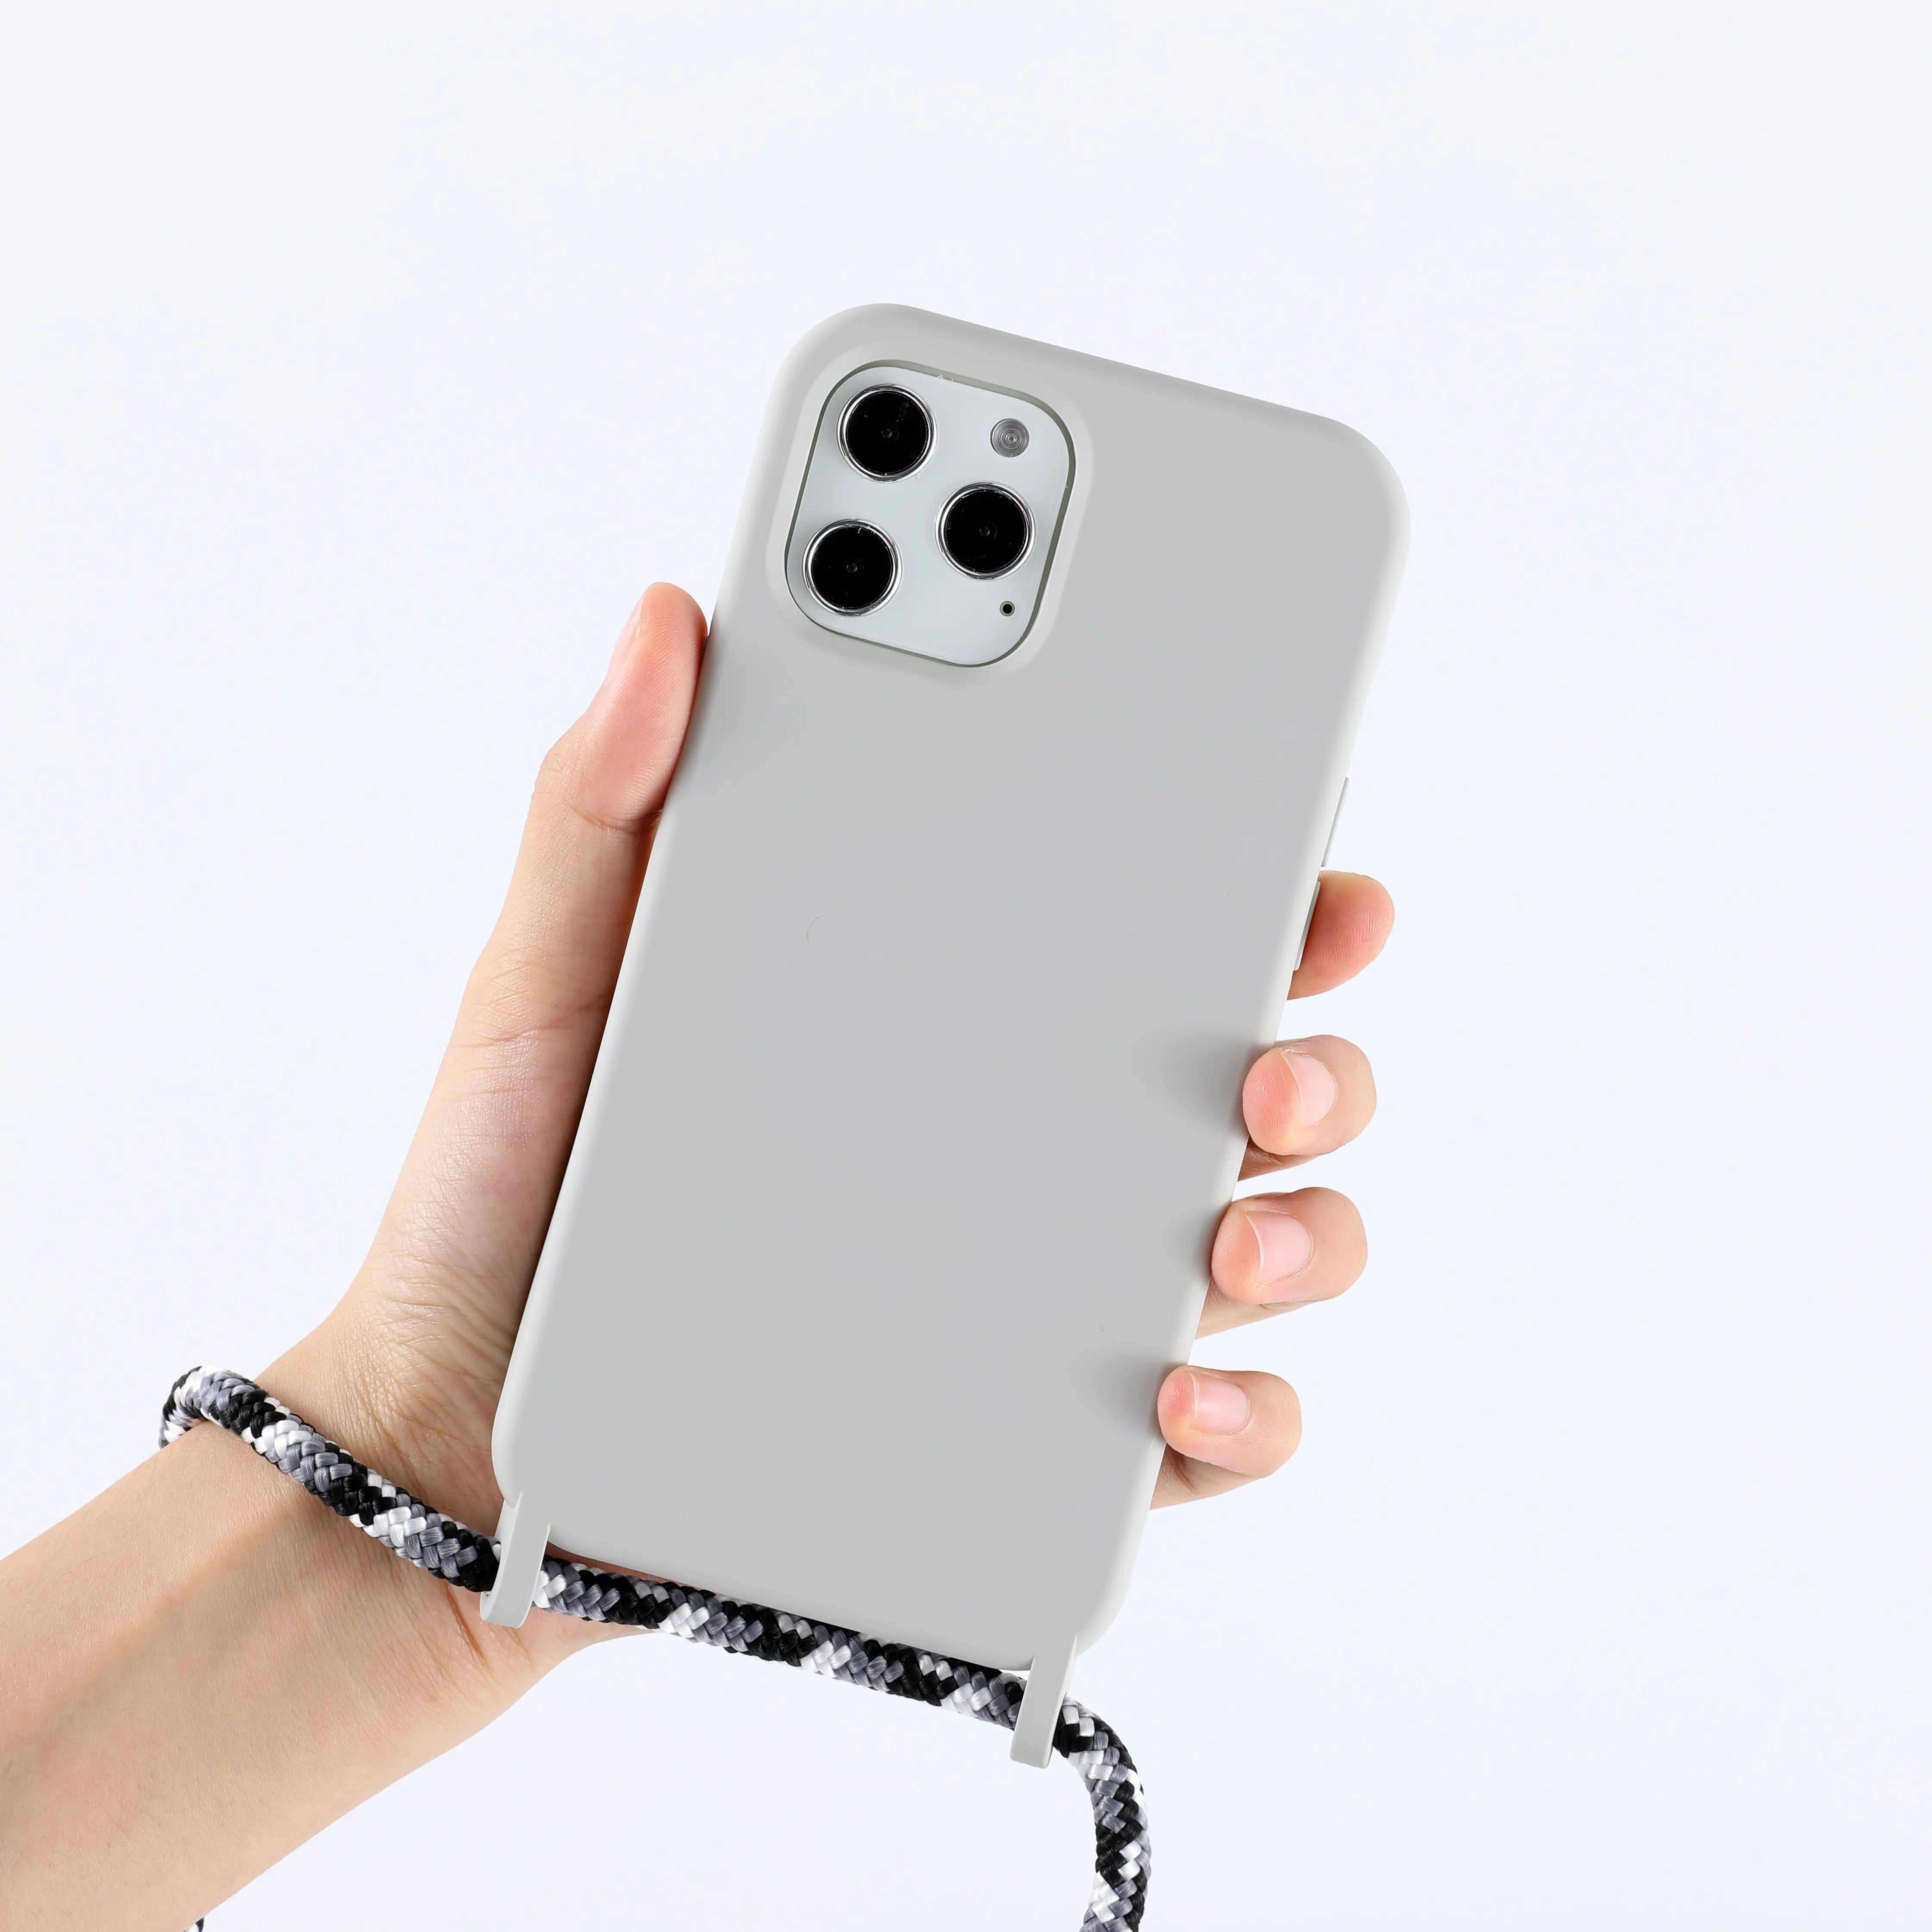 Top Seller Smart Cover Case Original Liquid Silicone For Iphone 11/12/8/X/XS Soft Silicon Lanyard Cellphone Case